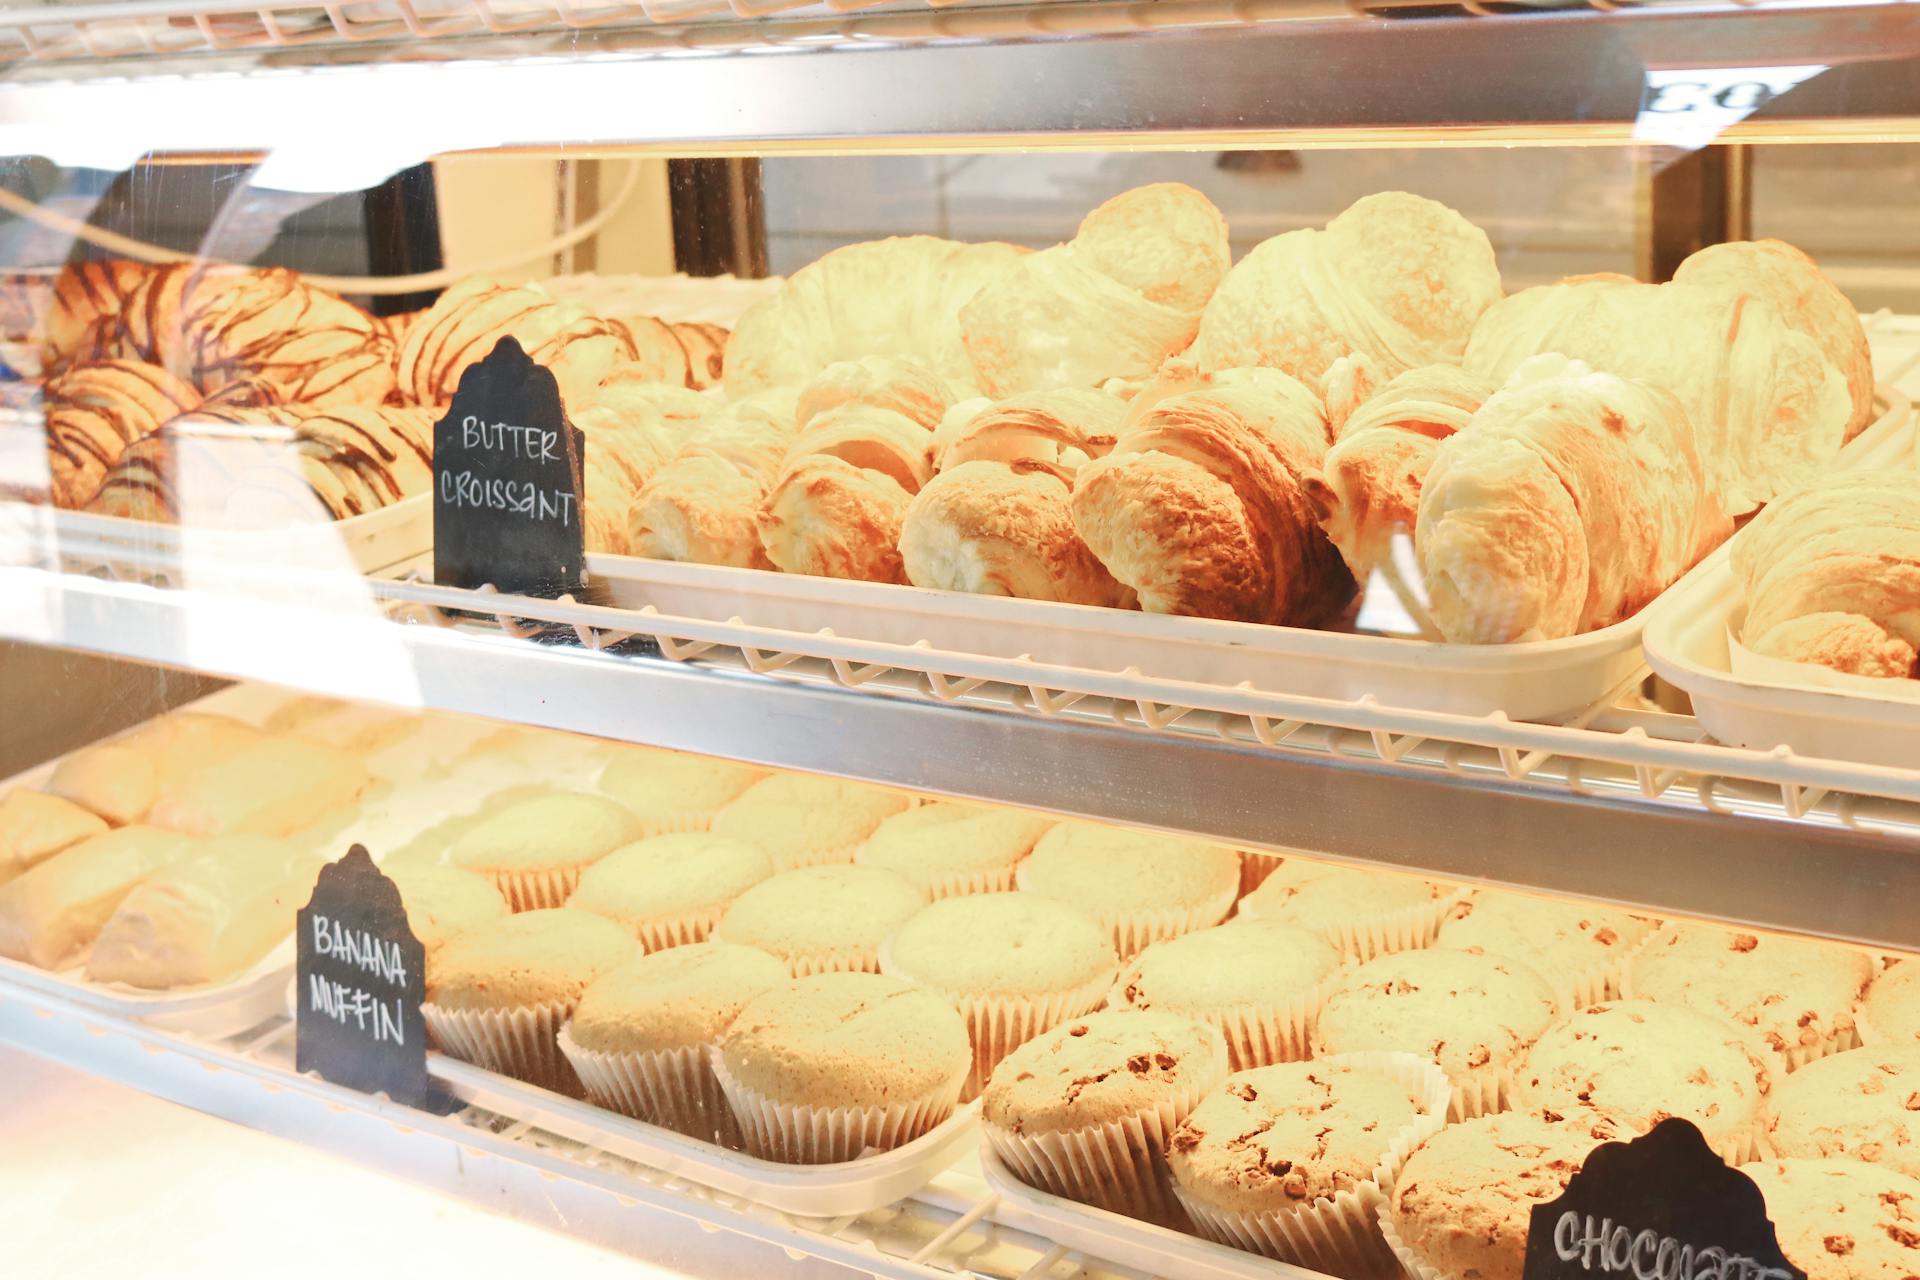 Croissants and muffin displayed in a bakery | Source: Pexels